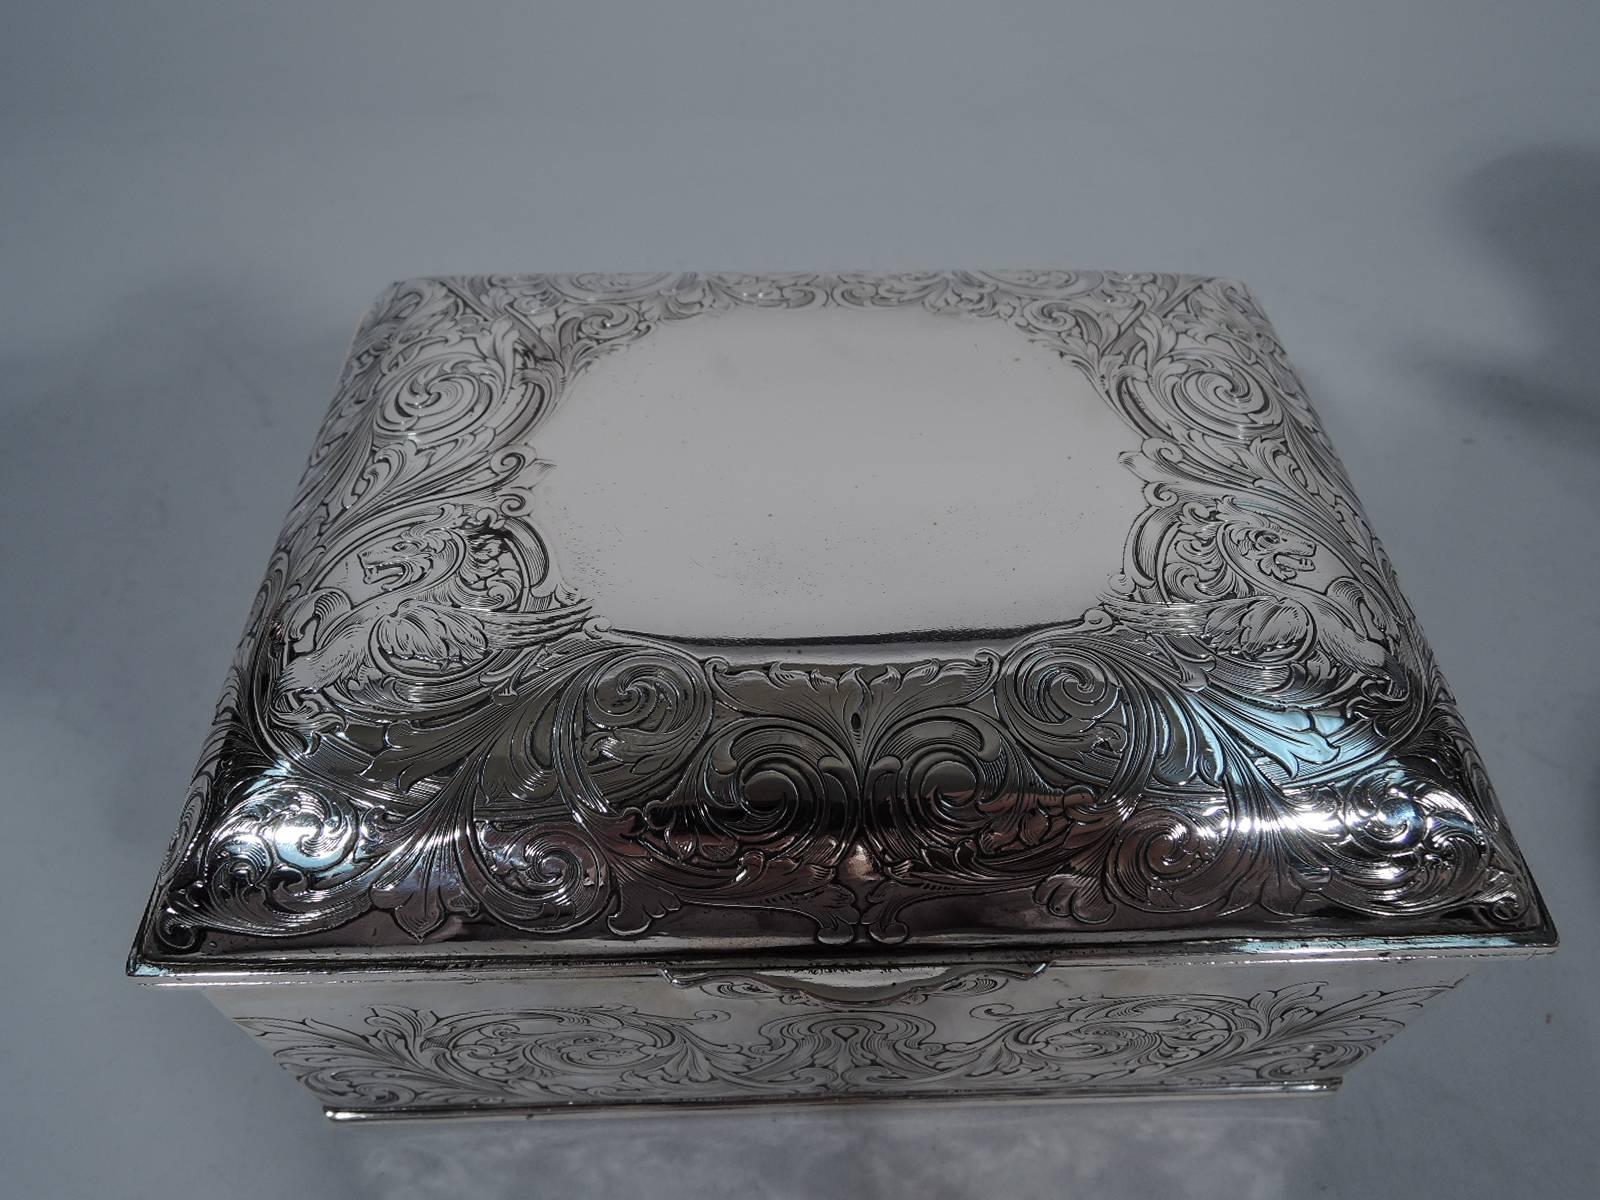 Sterling silver jewelry box. Made by Gorham in Providence, circa 1890, for Shreve, Crump & Low. Rectangular with straight sides. Cover hinged and curved with scrolled tab. Acid-etched foliage and gryphons. A fluid fantasy pattern. Cover top has